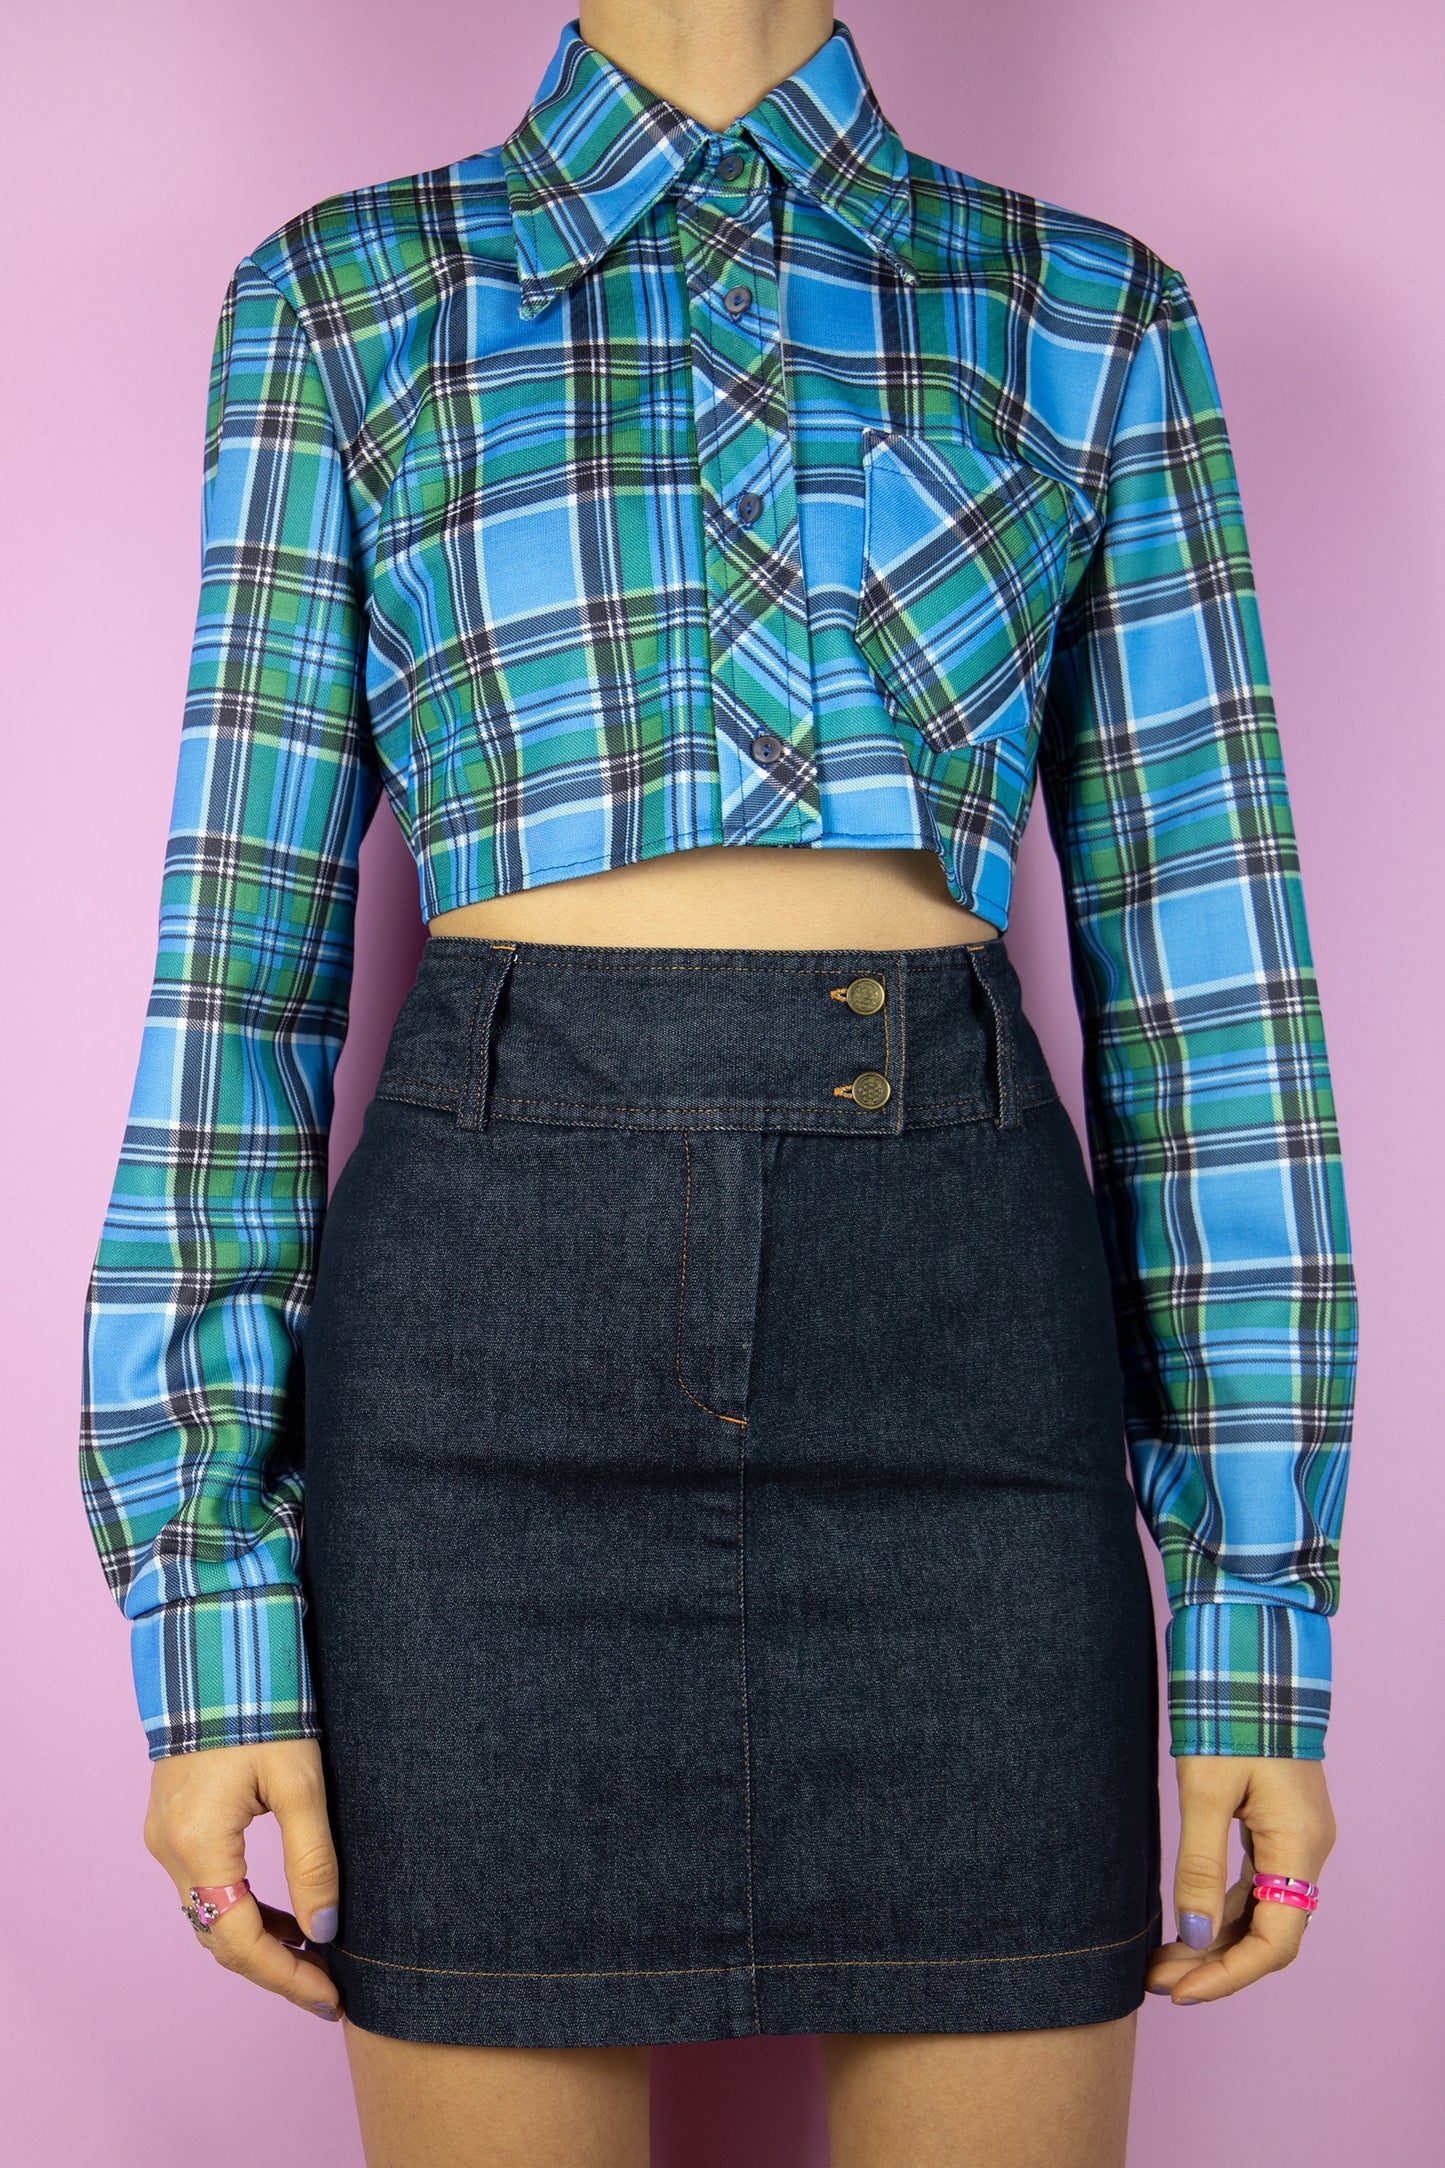 The Vintage 90’s Blue Plaid Cropped Shirt is a long-sleeve top featuring blue and green checkered patterns, a collar, buttons, and a pocket. Its oversized fit adds an extra touch to this stylish utility grunge overshirt from the 1990s.